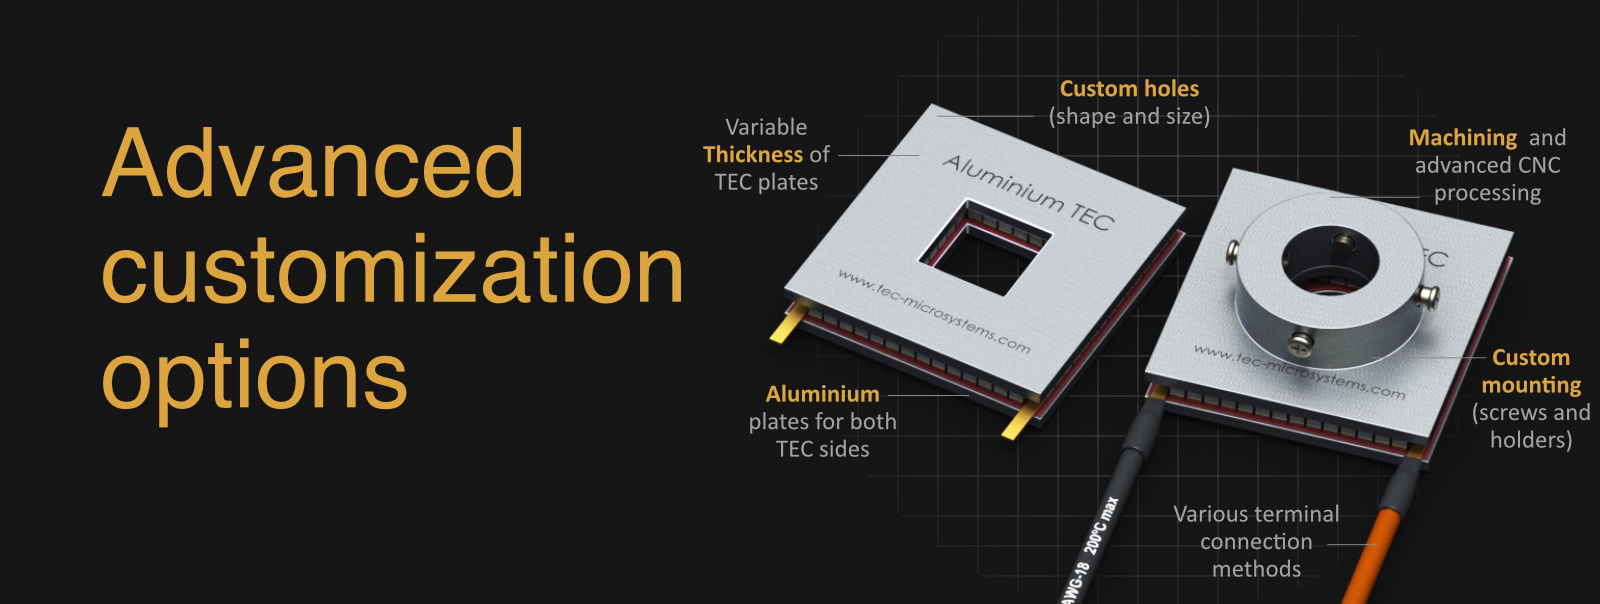 Aluminium thermoelectric coolers with holes - advanced customization and manufacturing options